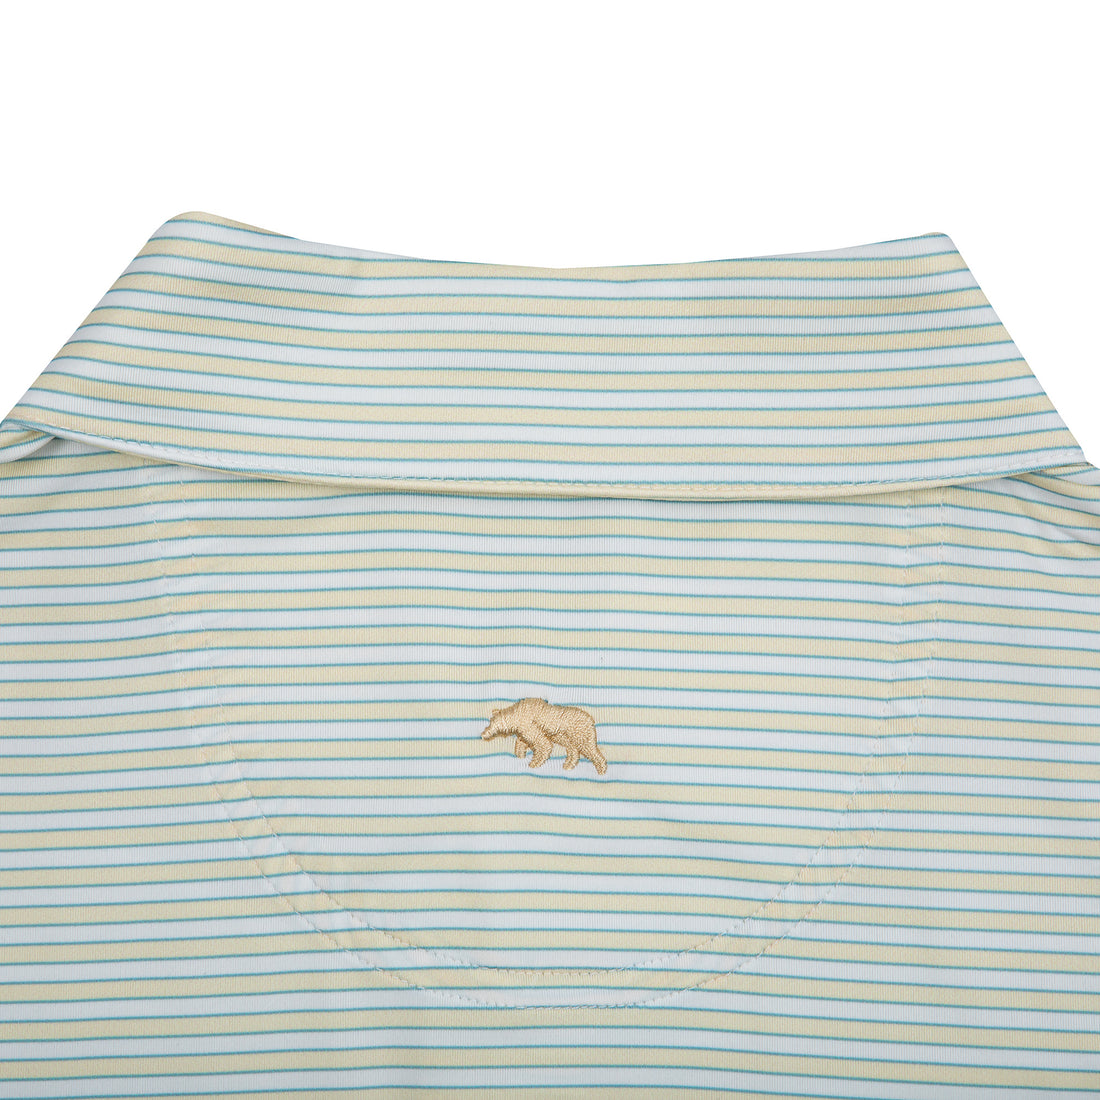 Onward Reserve Mulligan Striped Performance Polo- Pastel Yellow/Ether